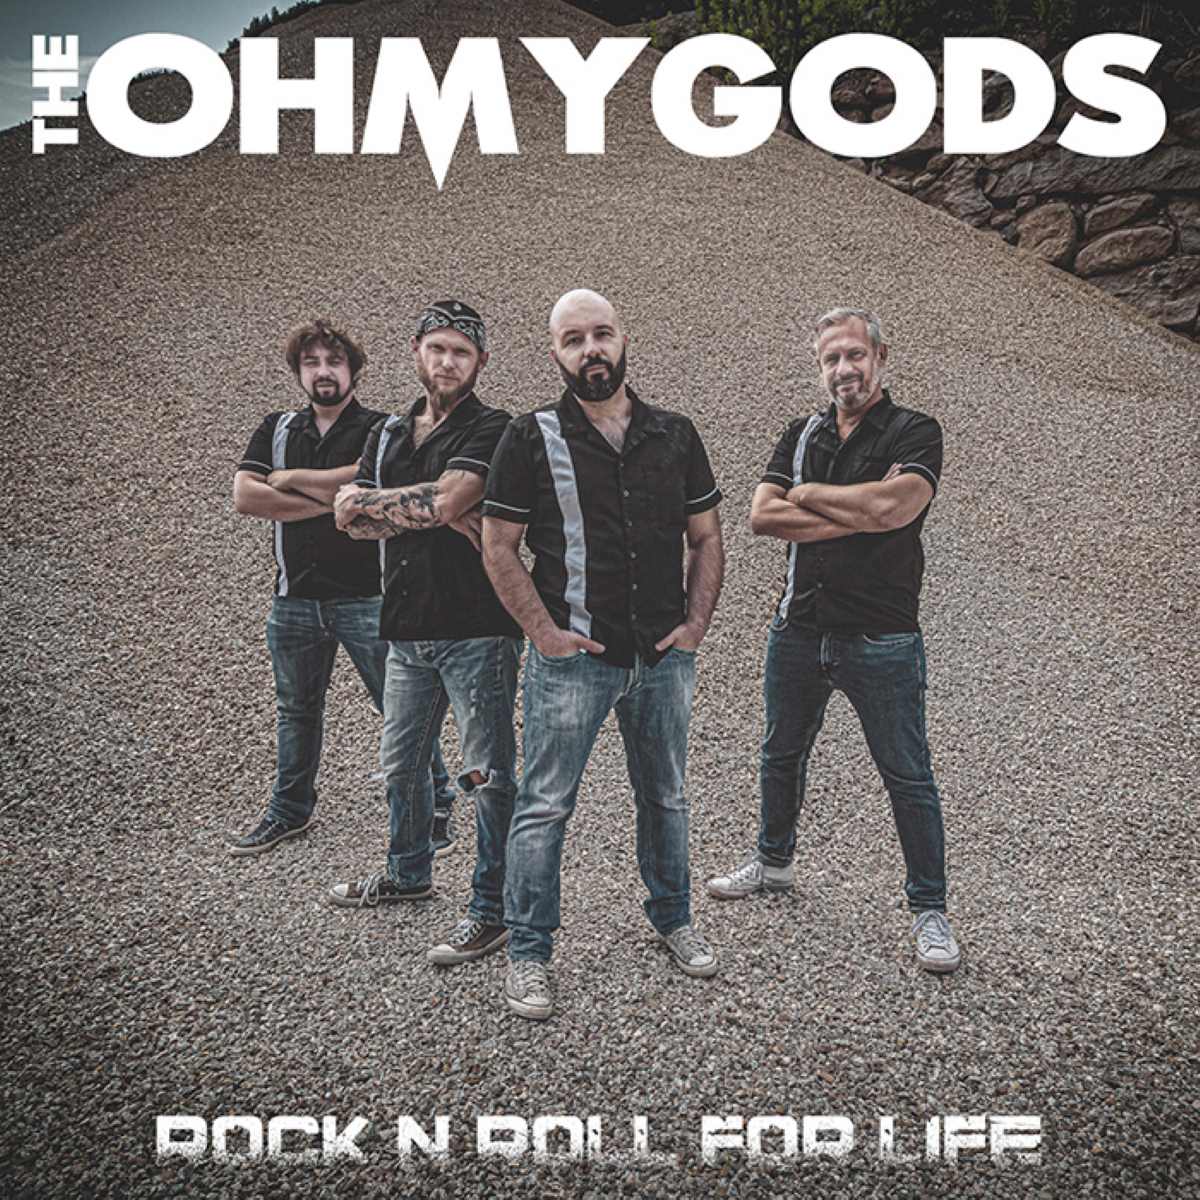 The Ohmygods: in uscita il nuovo album “Rock’n’roll for life”